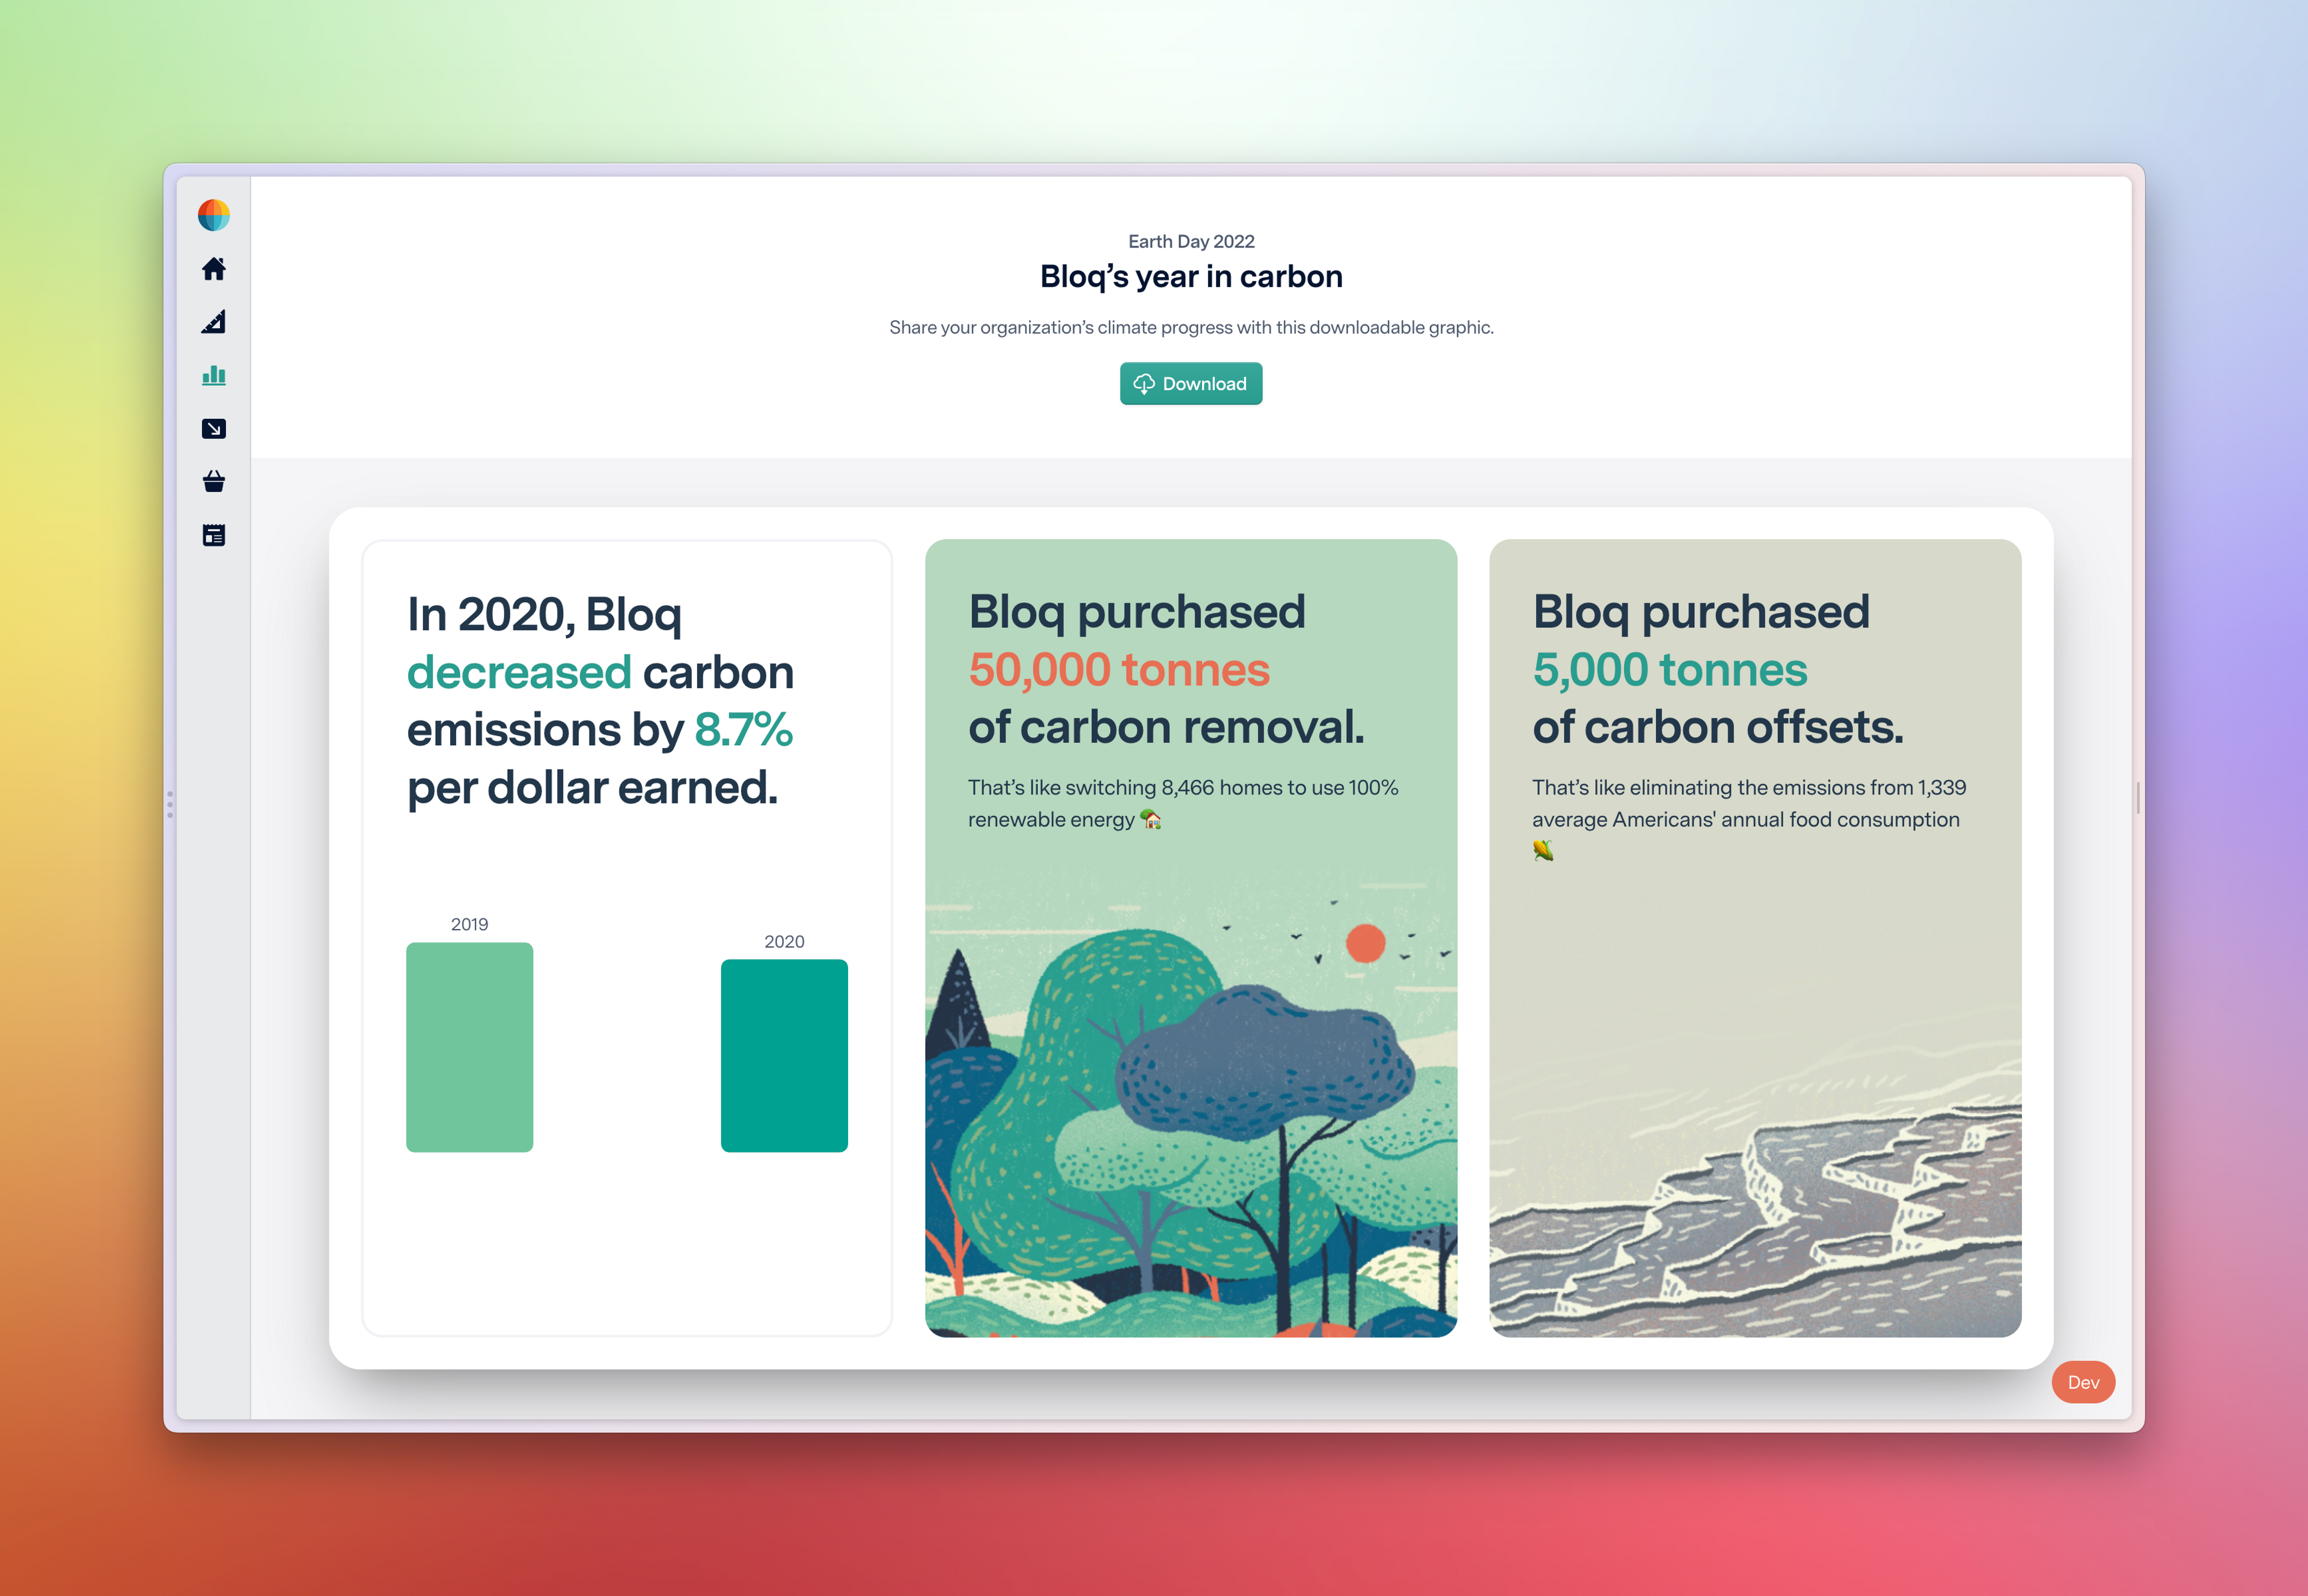 Screenshot of the tool in progress with “Bloq’s year in carbon” as a title, a download button, and three panes showing the company’s climate progress